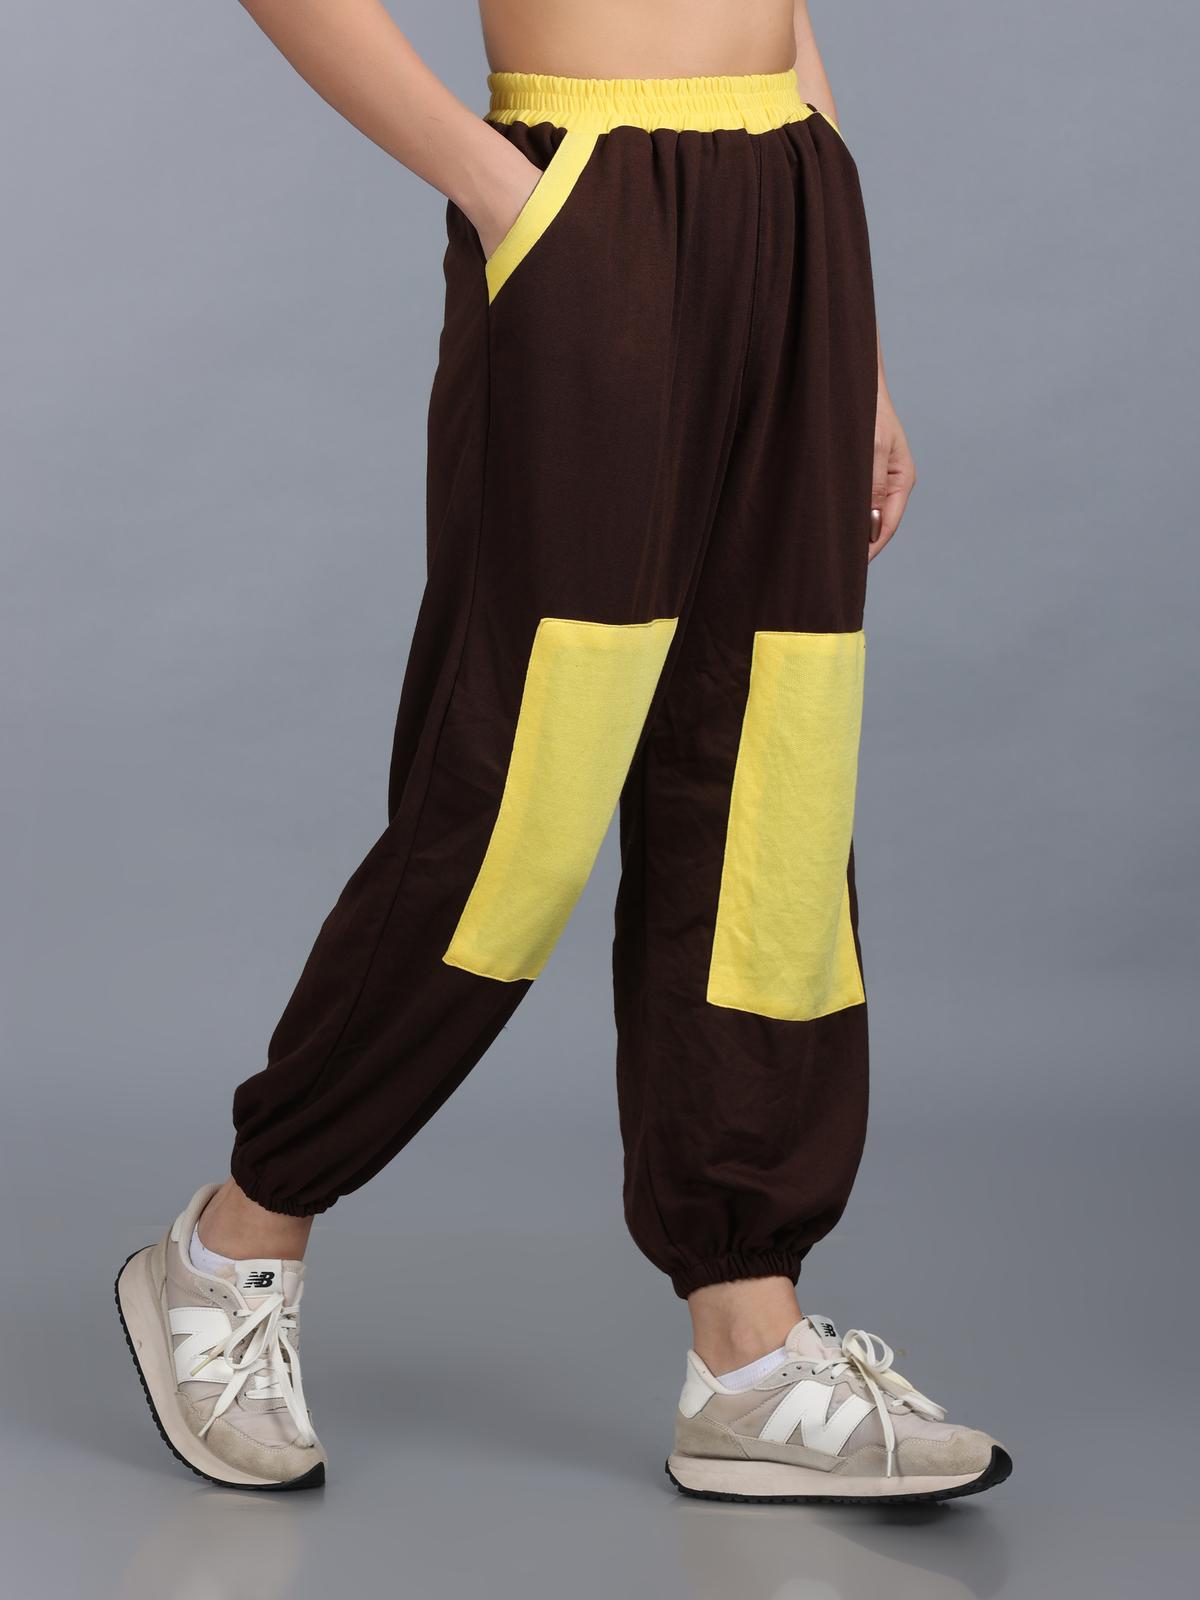 Women Brown Yellow Street Hoppers - Relaxed Fit Dance Lounge Pyjamas